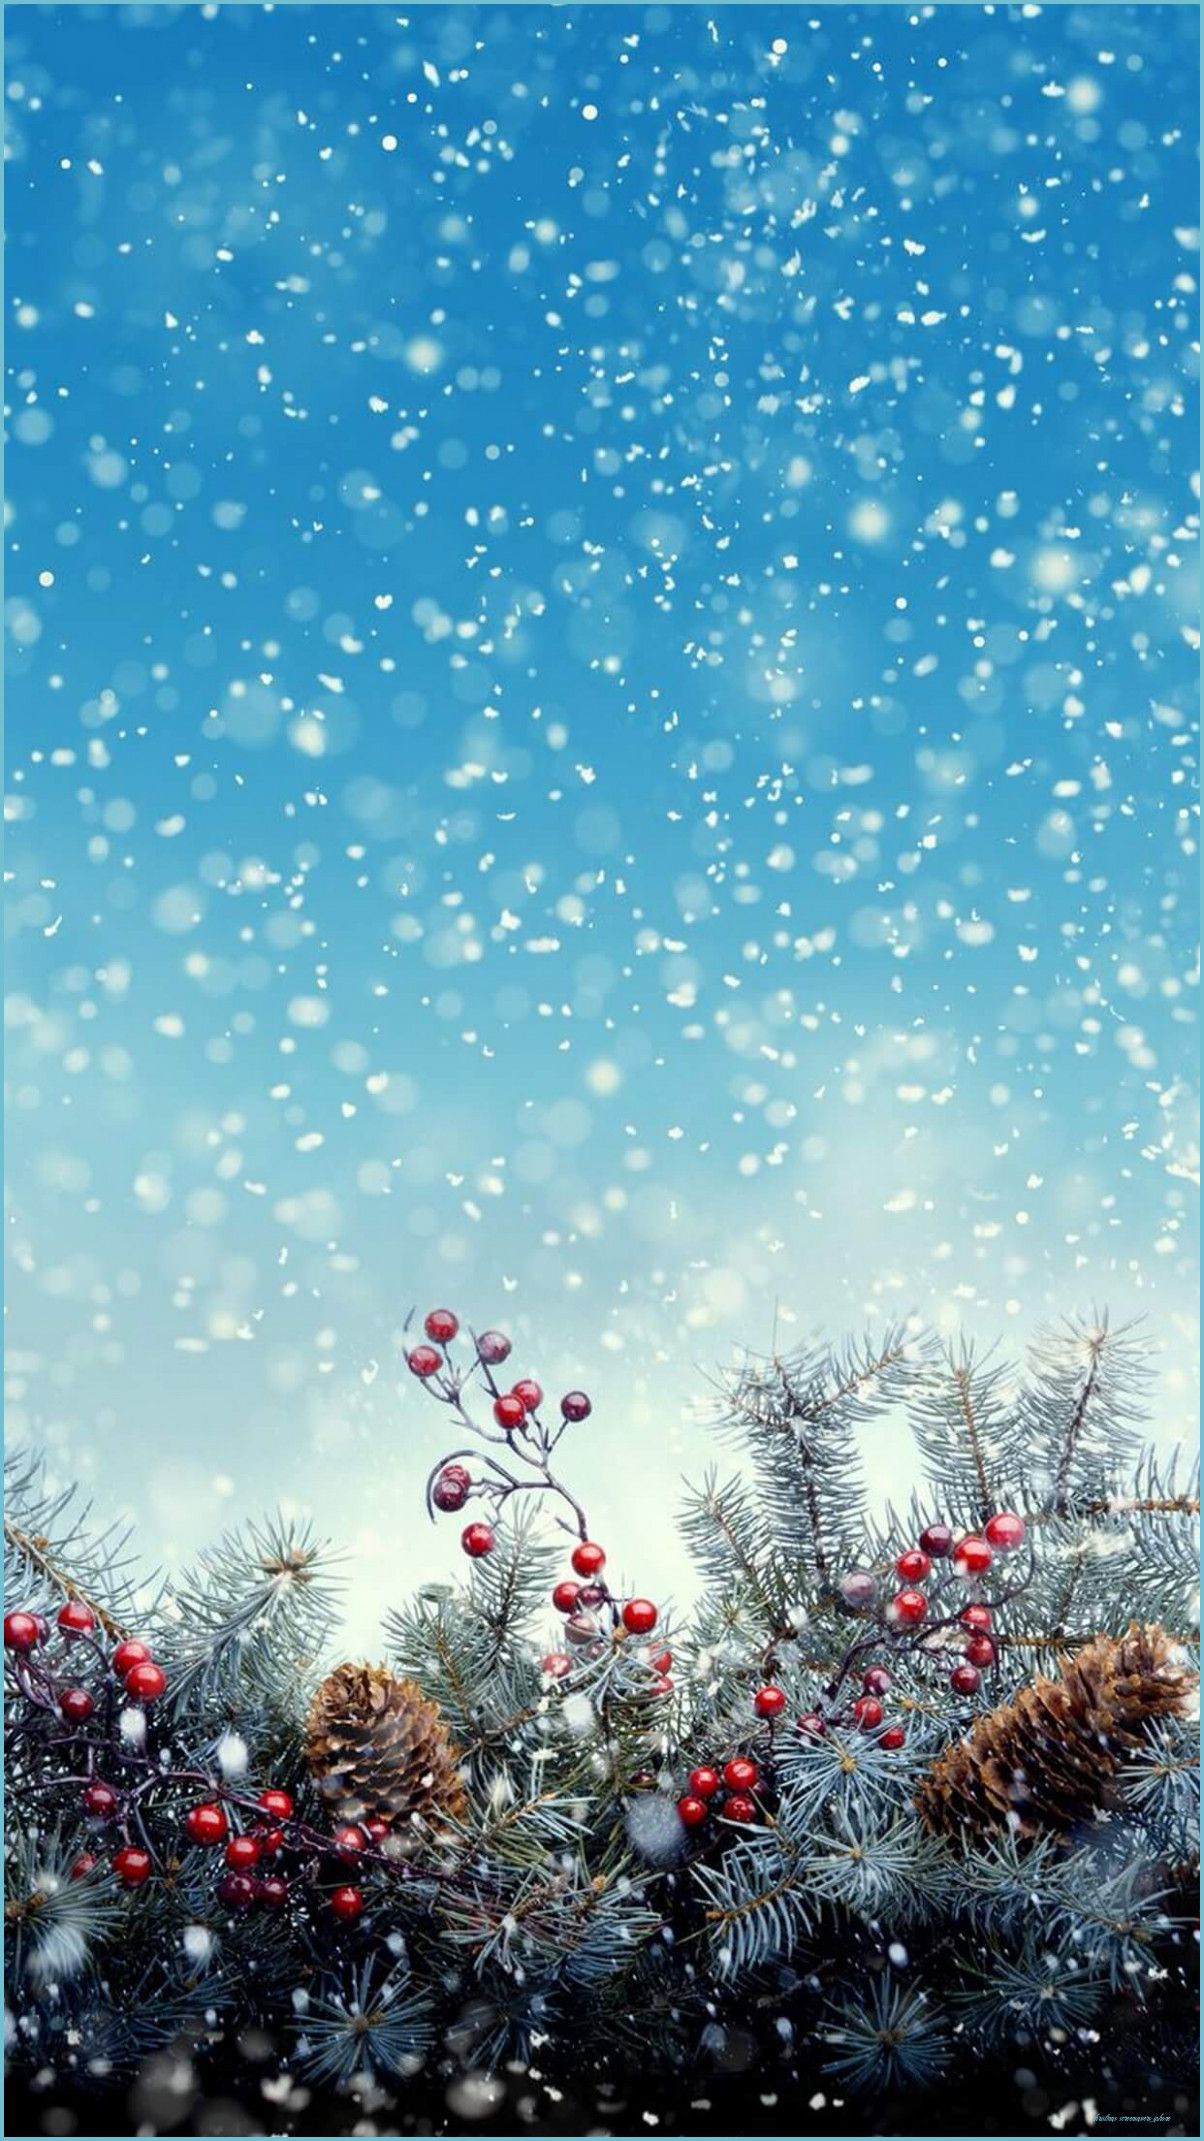 Try to Use 11 Christmas Wallpaper for iPhones screensavers iphone